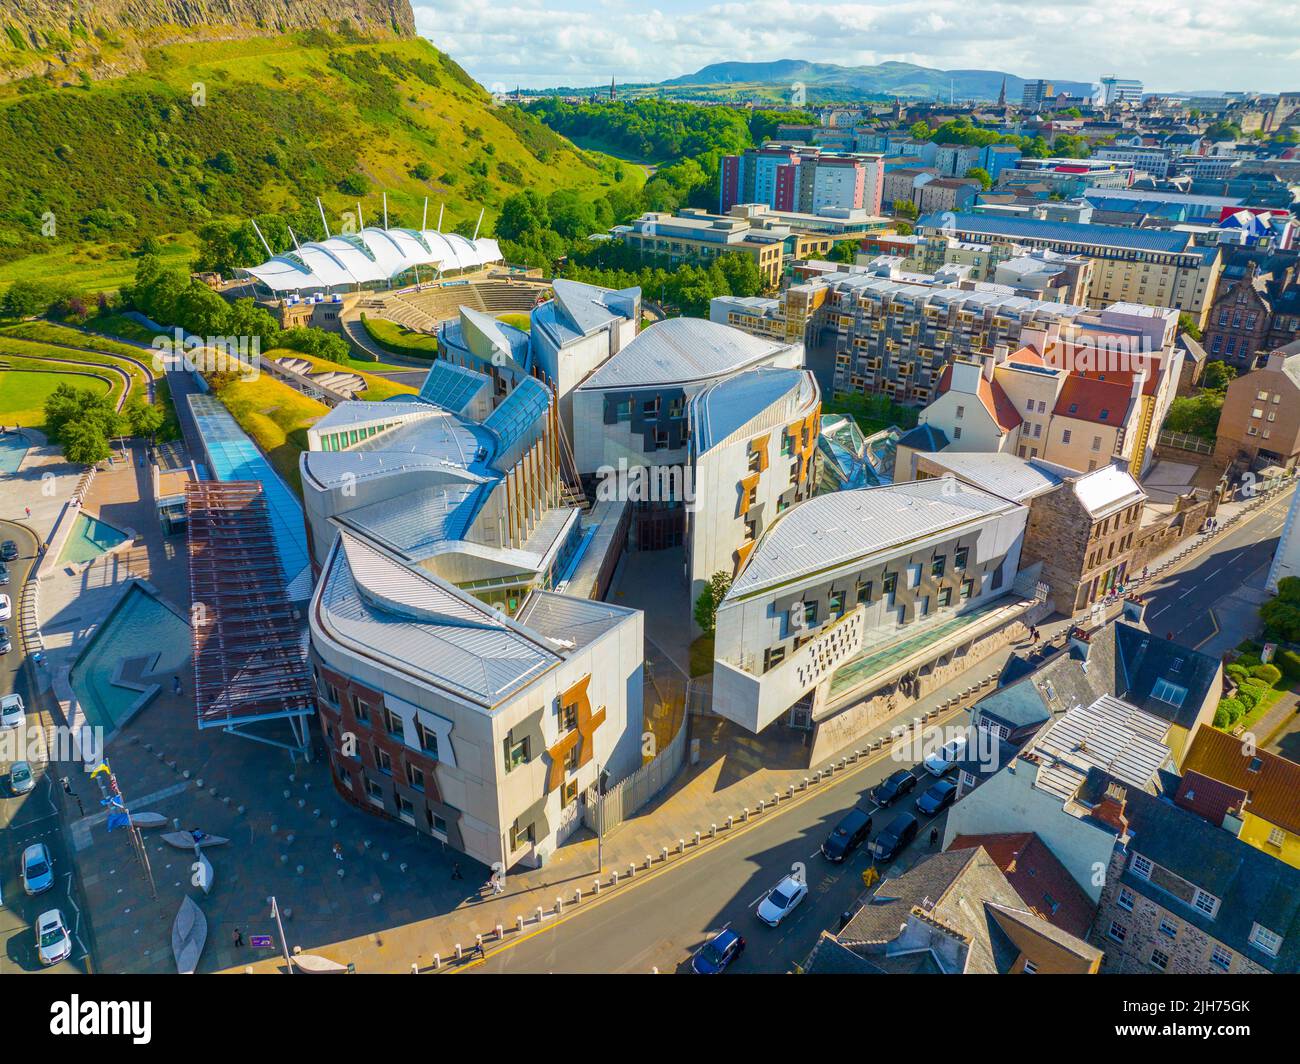 Scottish Parliament Building aerial view on Royal Mile in Old Town Edinburgh, Scotland, UK. Old Town Edinburgh is a UNESCO World Heritage Site since 1 Stock Photo